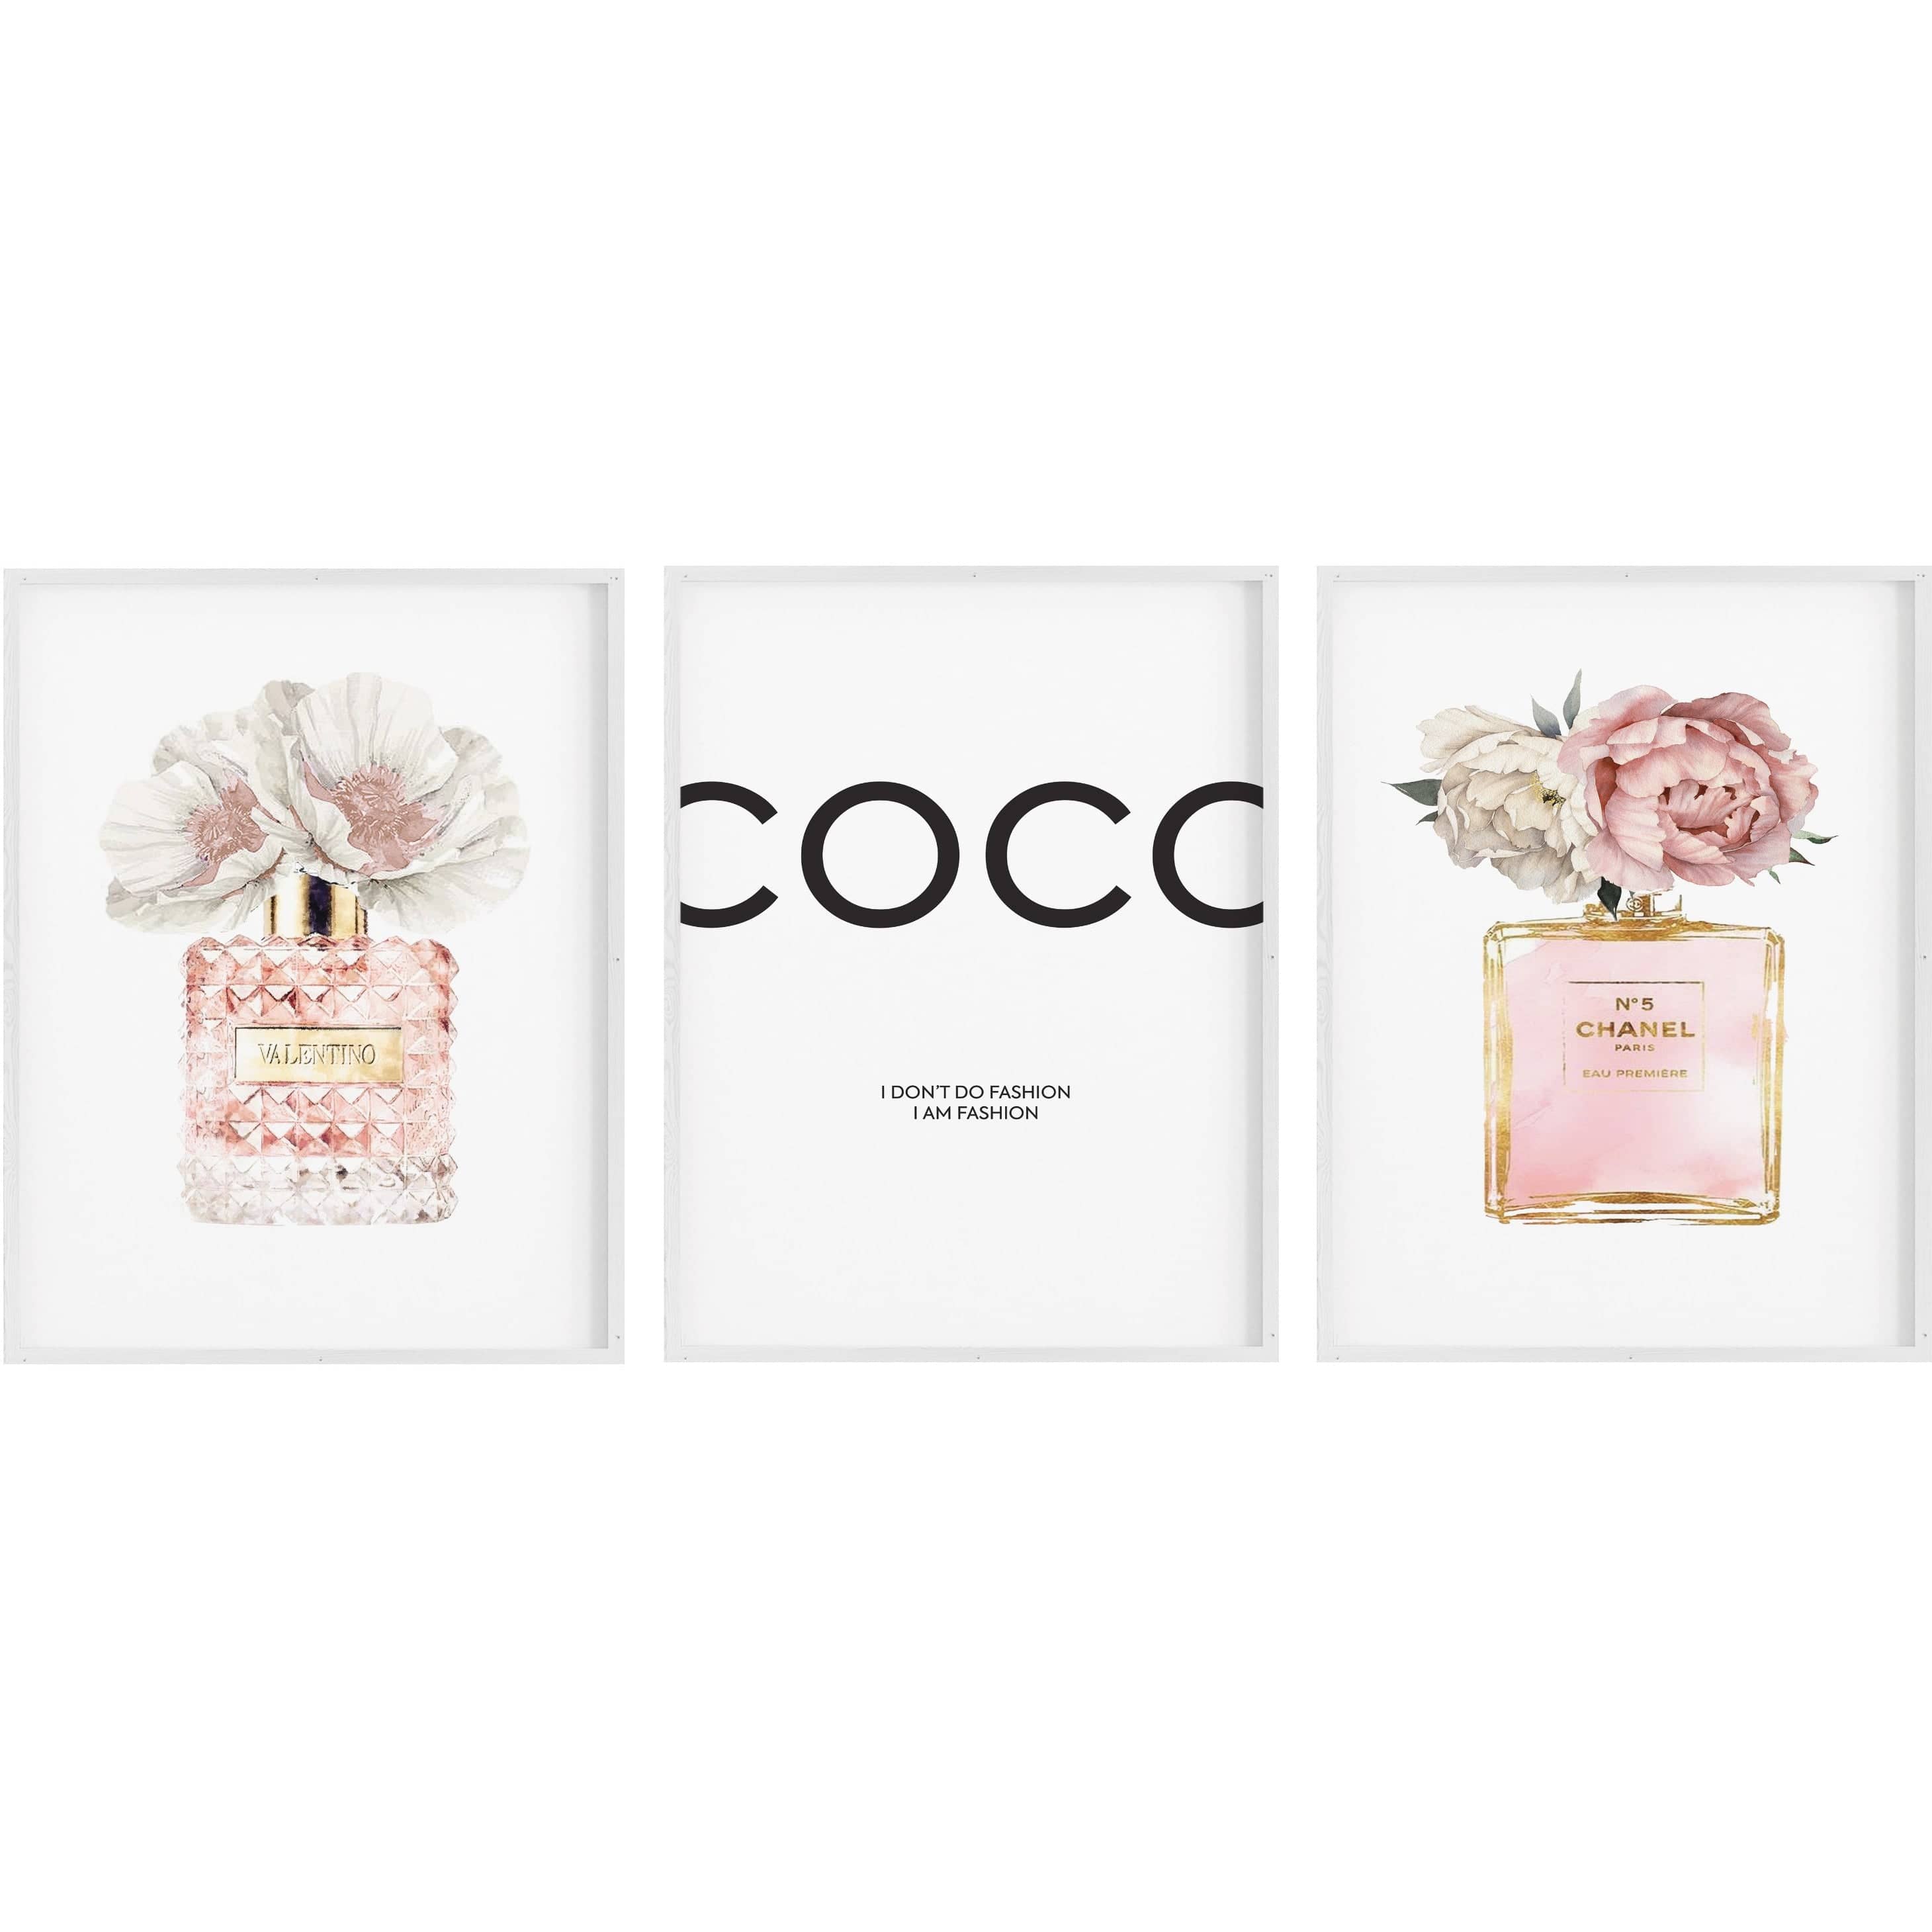 Blush Pink Floral Perfume and Coco - Fashion Prints, Set of 3 –  PersonalisedBee